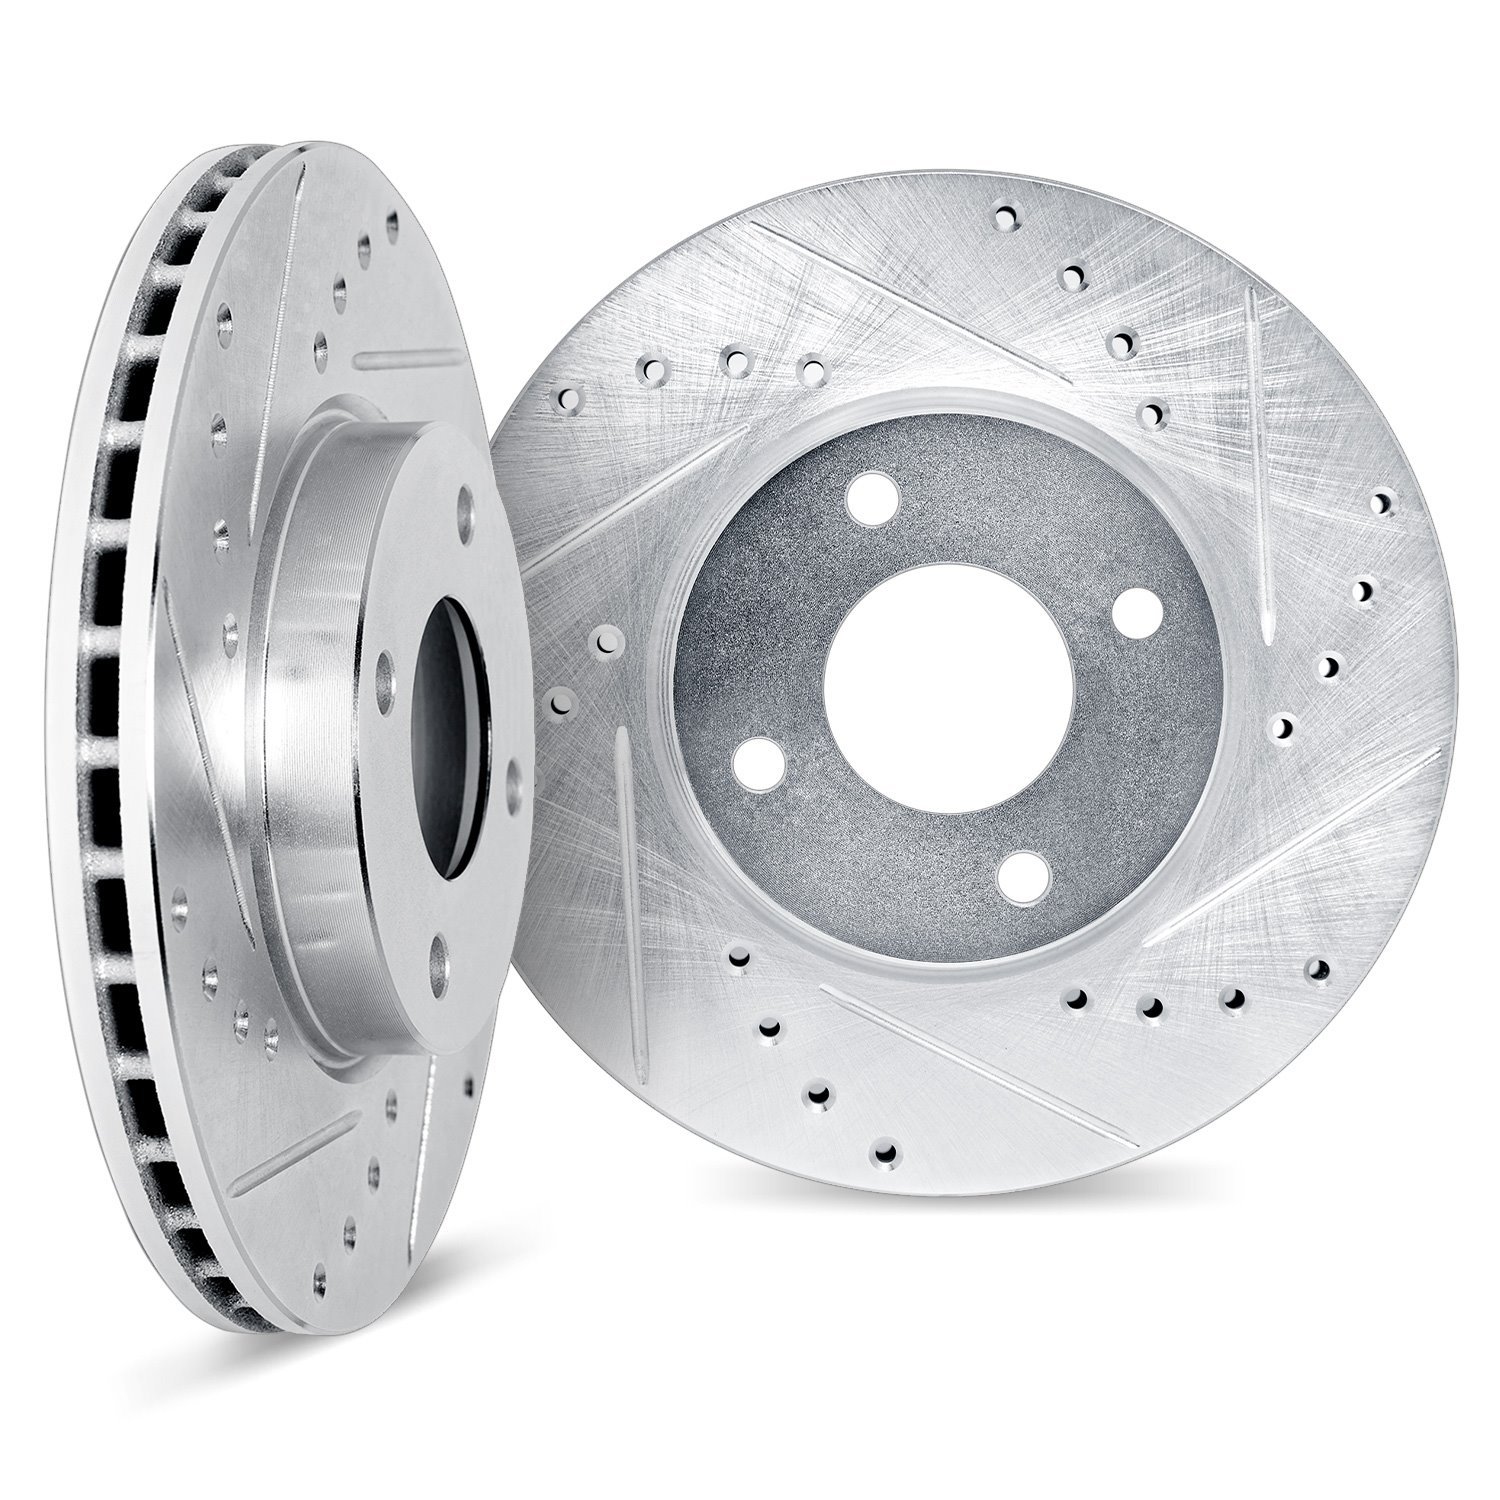 Drilled/Slotted Brake Rotors [Silver], 1991-1999 Lexus/Toyota/Scion